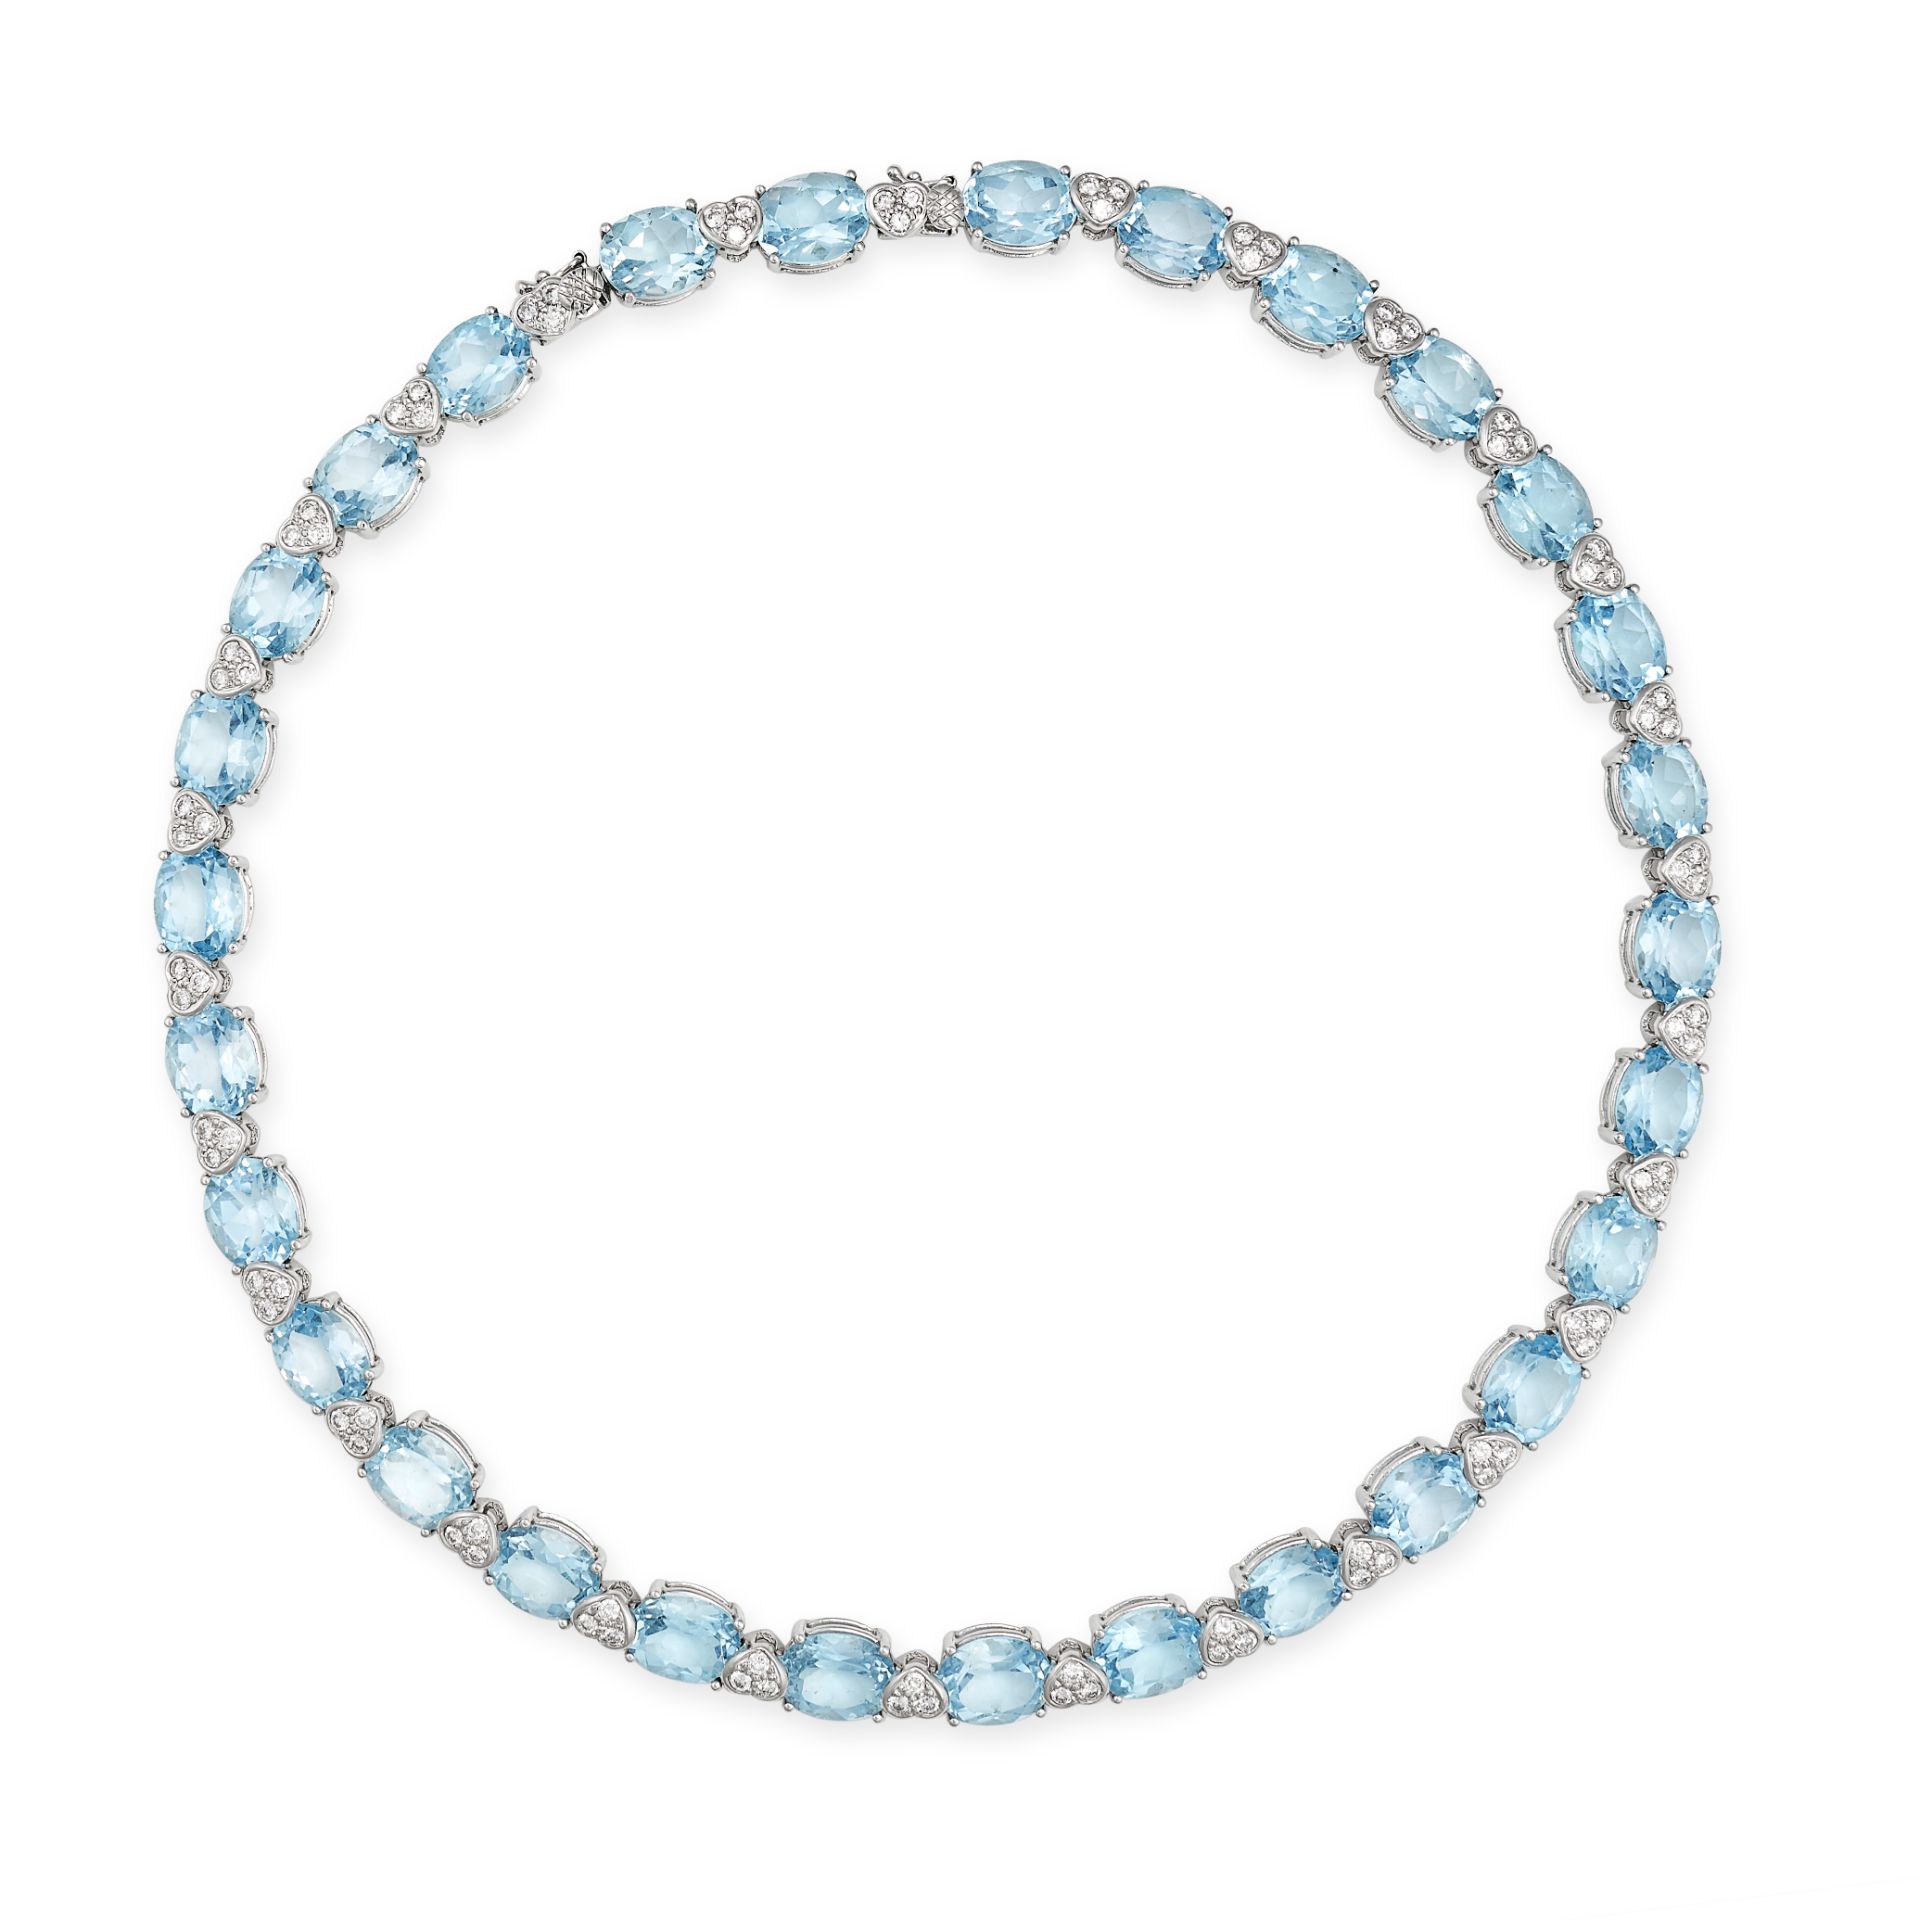 A BLUE TOPAZ AND DIAMOND RIVIERE NECKLACE in 18ct white gold, set with a row of oval cut blue top...